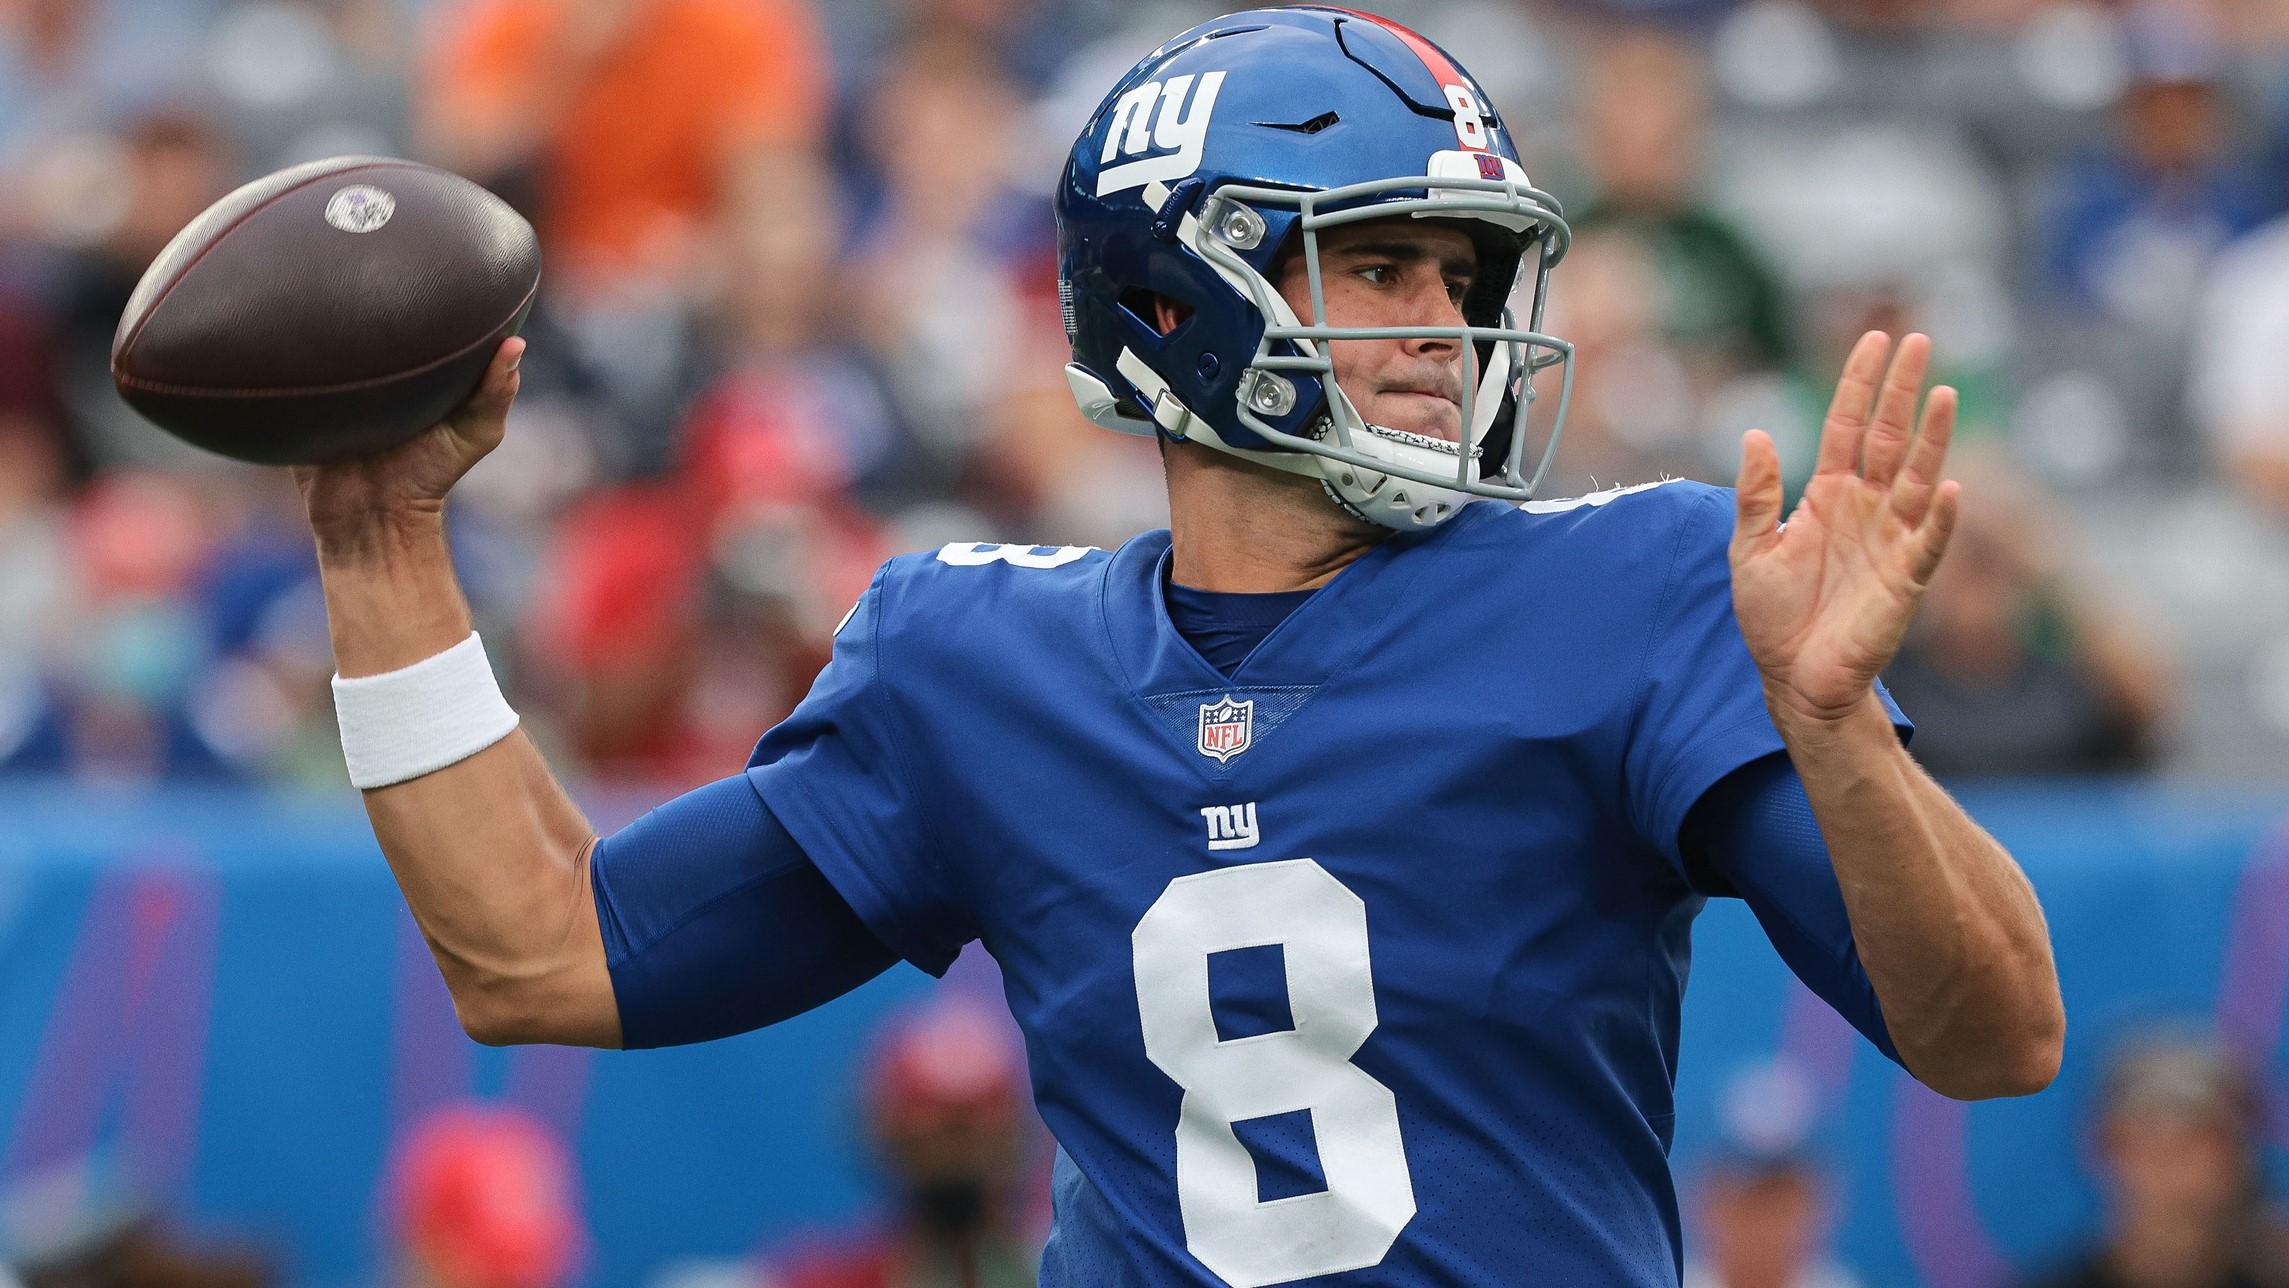 Aug 29, 2021; East Rutherford, New Jersey, USA; New York Giants quarterback Daniel Jones (8) throws the ball during the first quarter against the New England Patriots at MetLife Stadium. / Vincent Carchietta-USA TODAY Sports